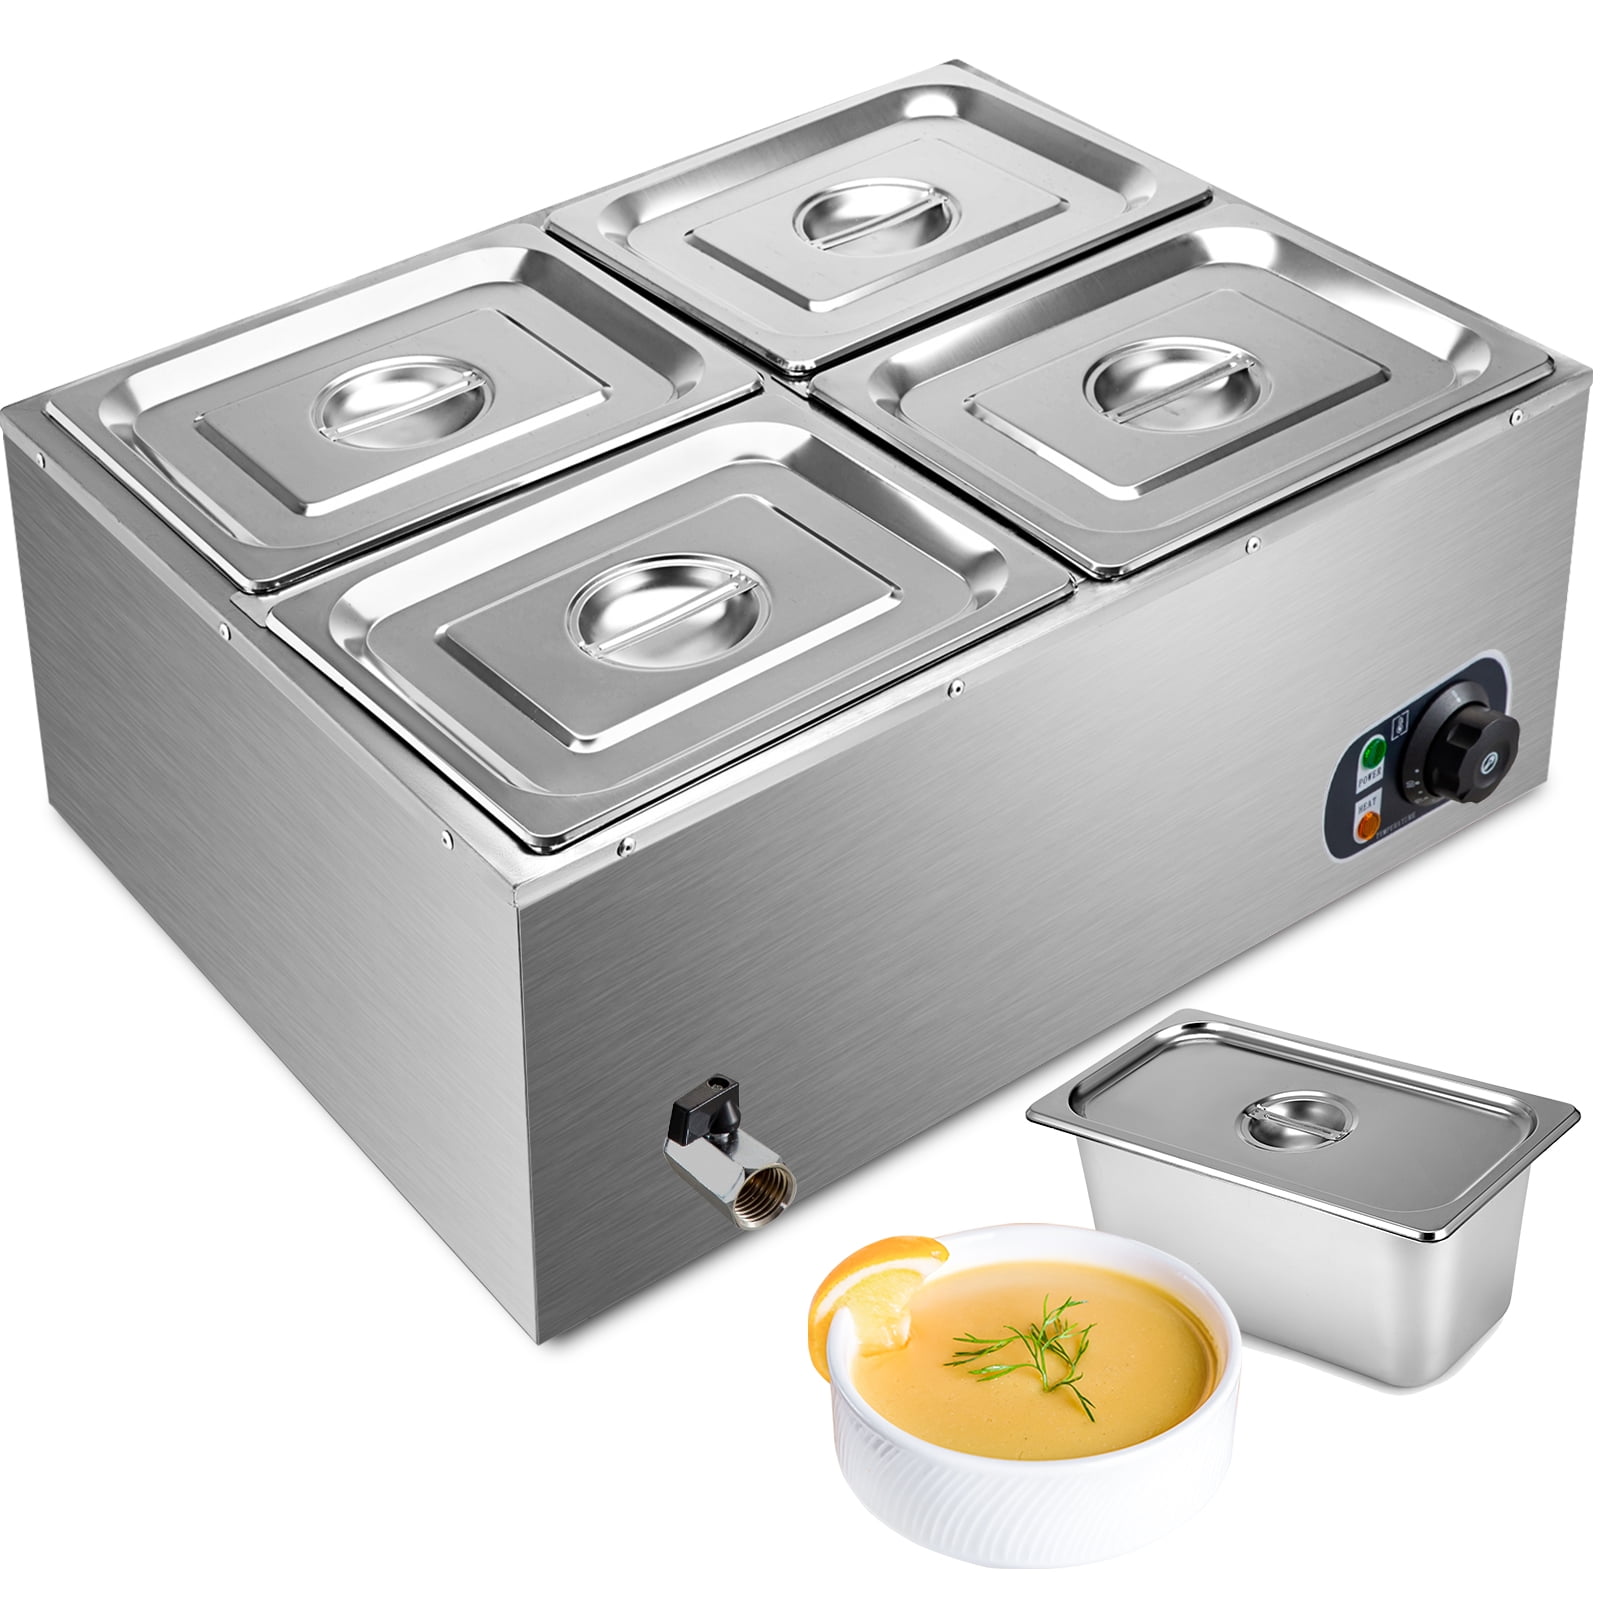 Details about   Countertop food warmer stainless Steel 